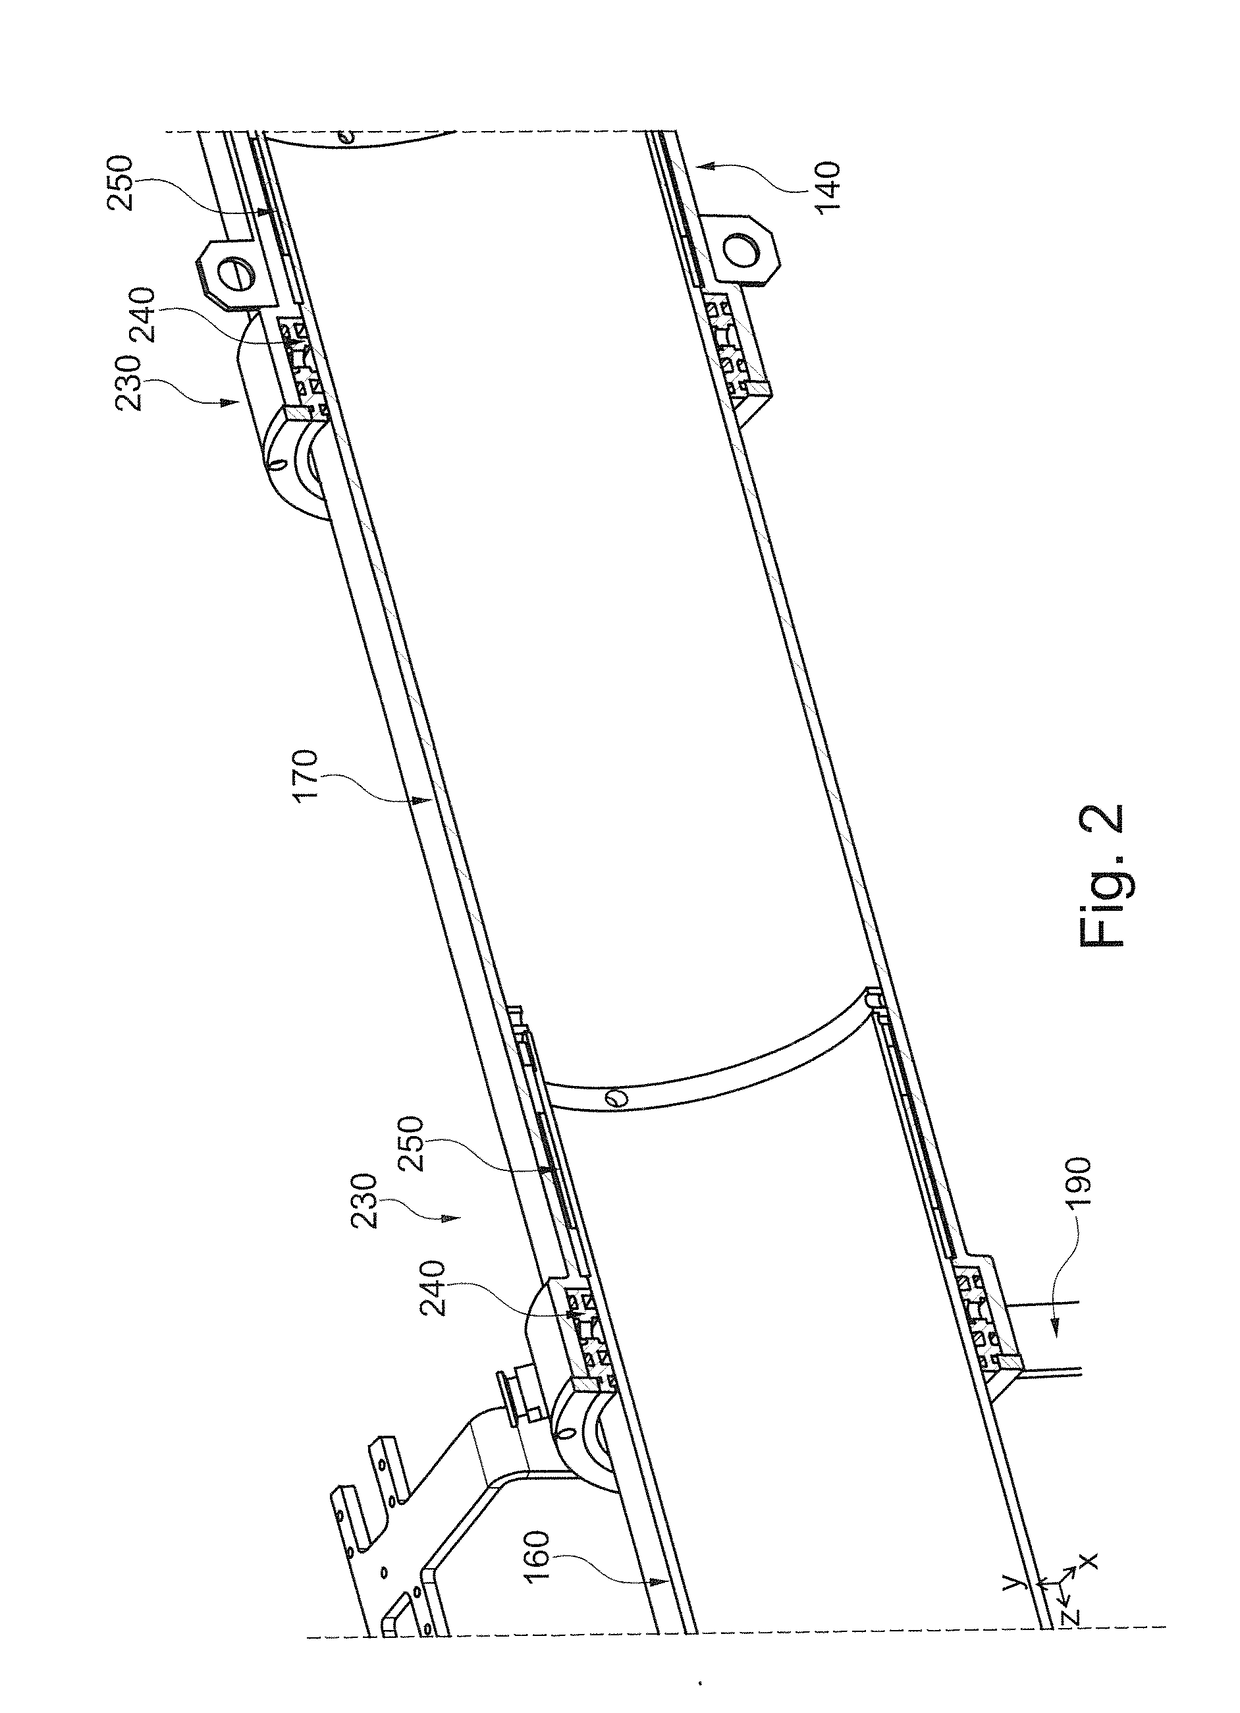 Apparatus and method for coating workpieces